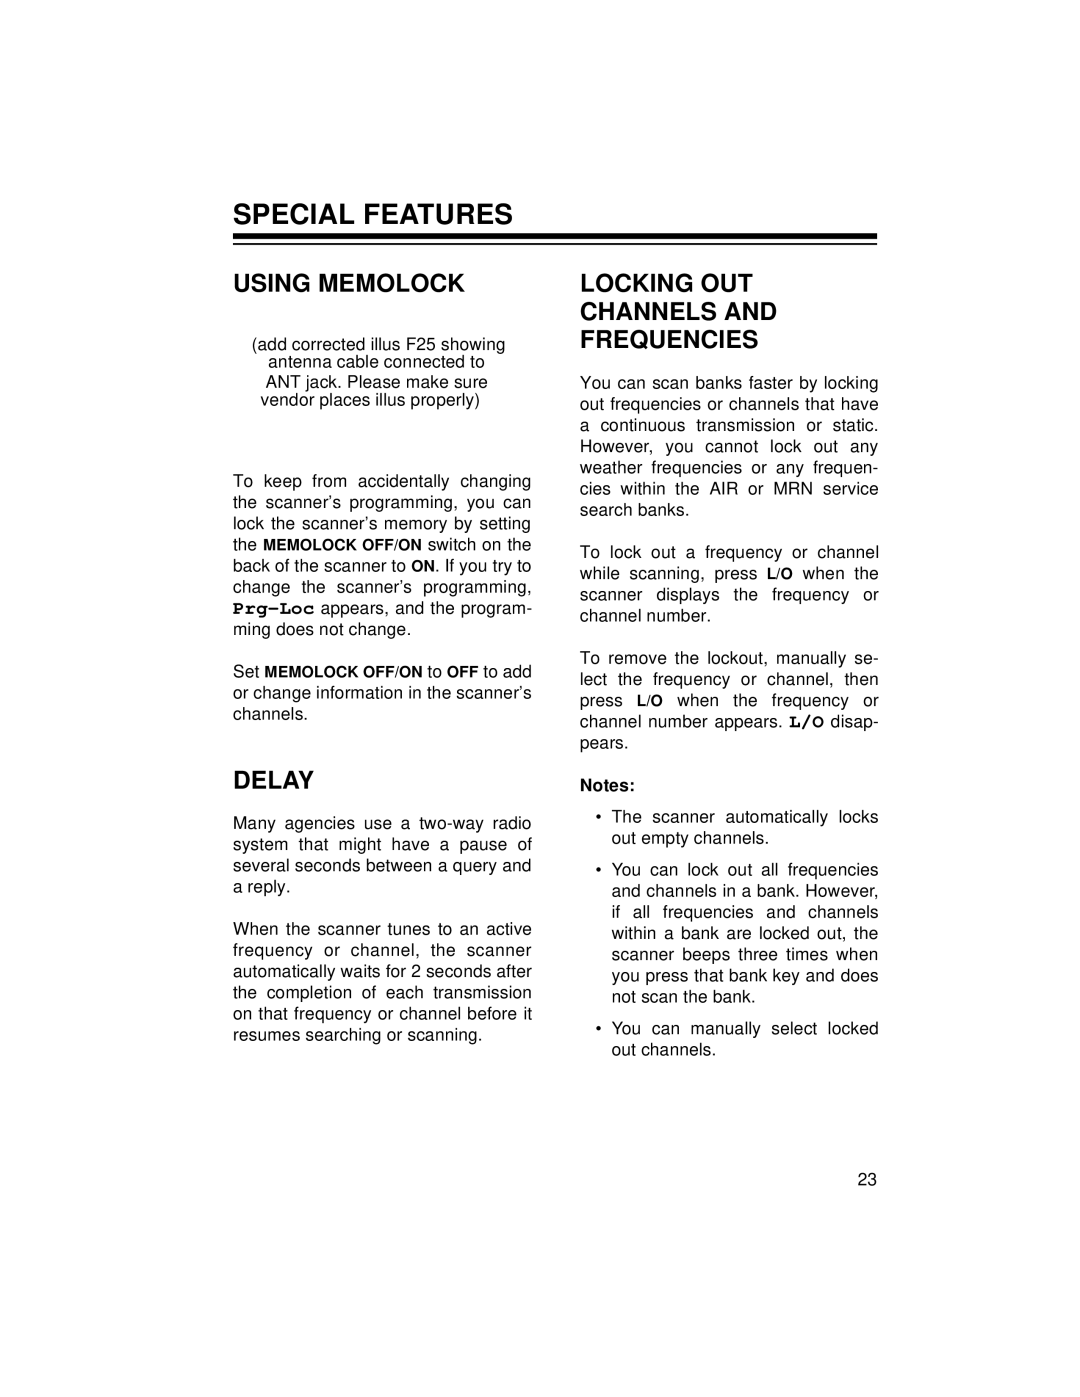 Radio Shack PRO-2056 owner manual Special Features, Using Memolock, Delay, Locking Out Channels And Frequencies 